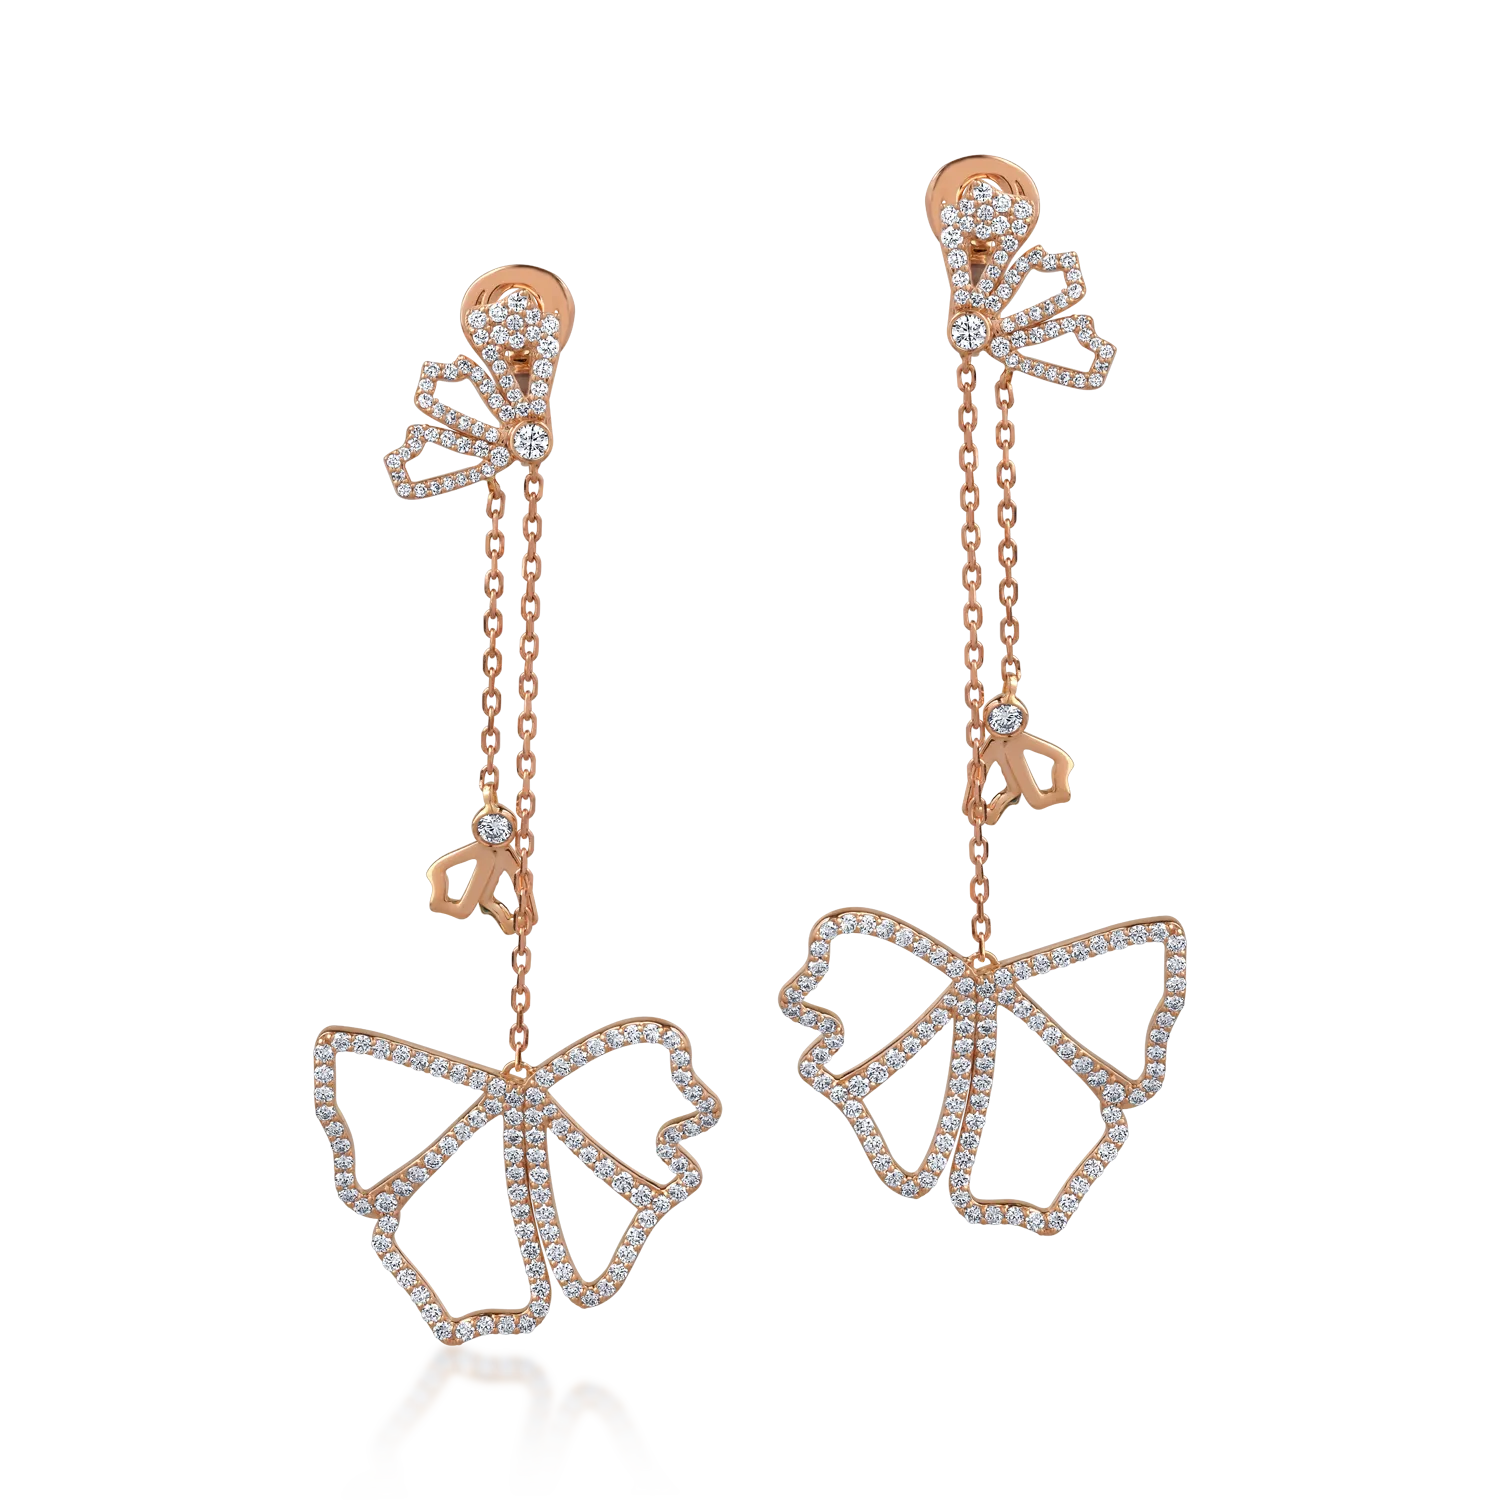 18K rose gold earrings with 2.8ct diamonds